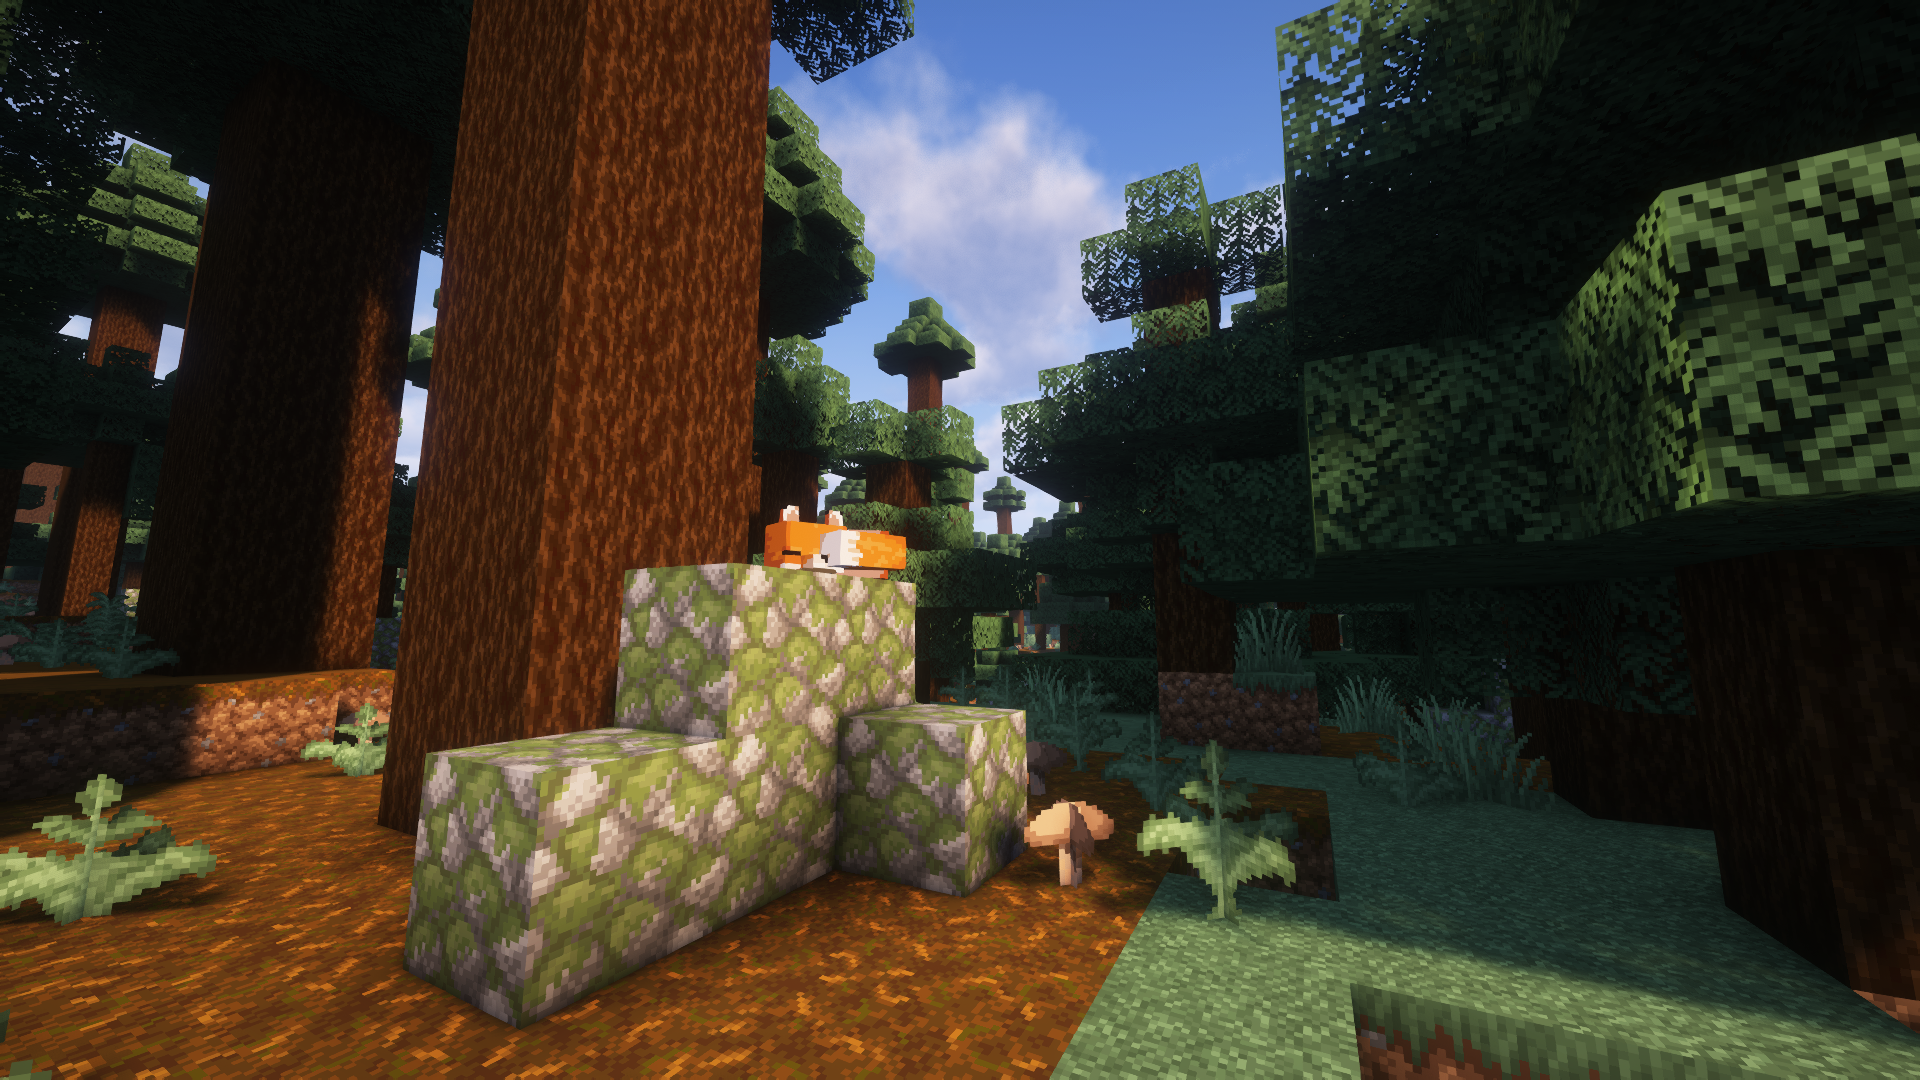 General 1920x1080 Minecraft forest fox Mojang video games video game art cube trees screen shot clouds sky CGI